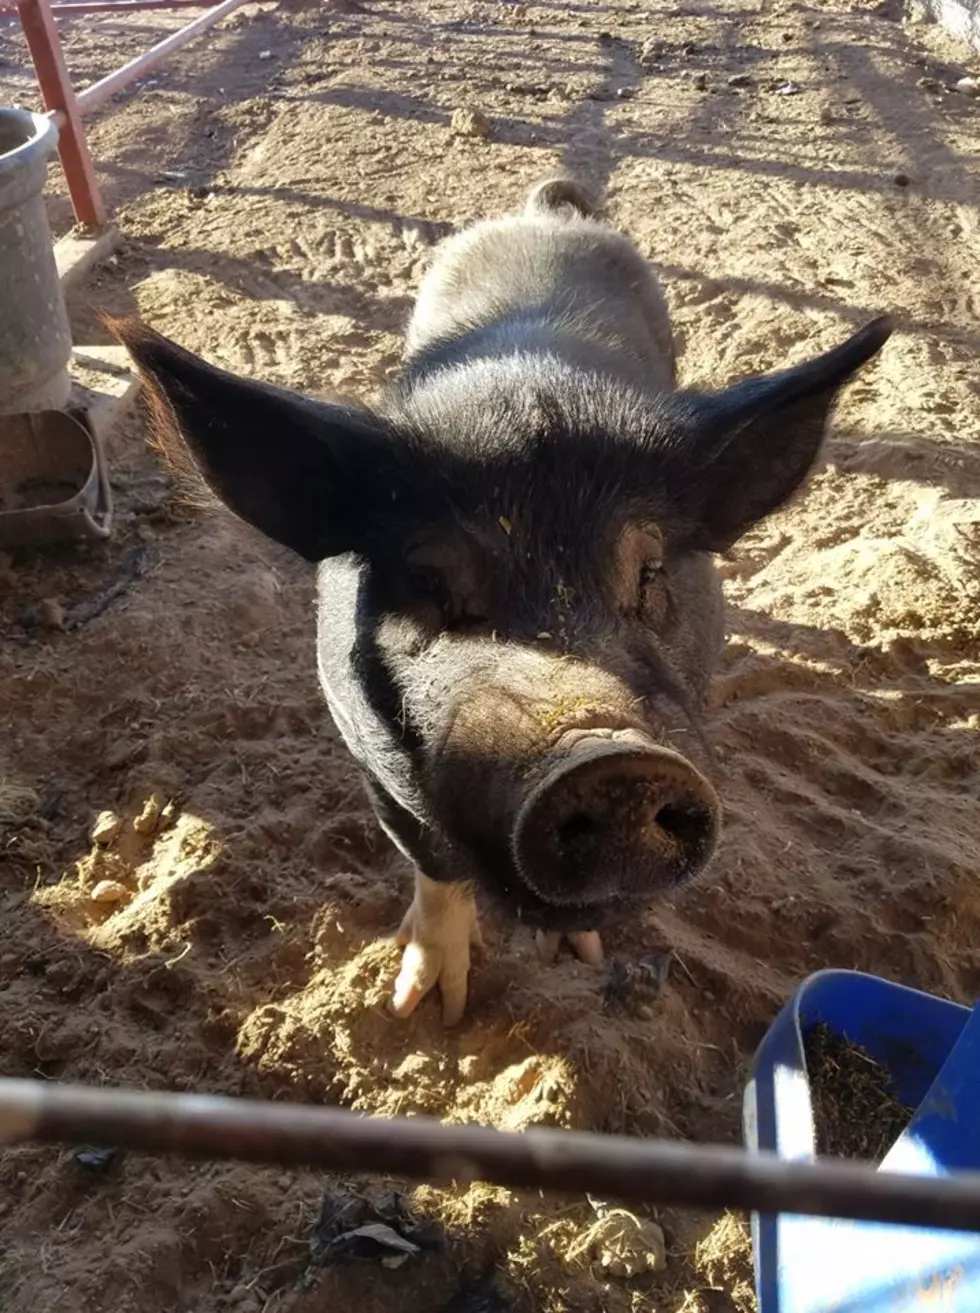 Missing A Pig In Amarillo? Sheriff's Dept. Wants To Give It Back